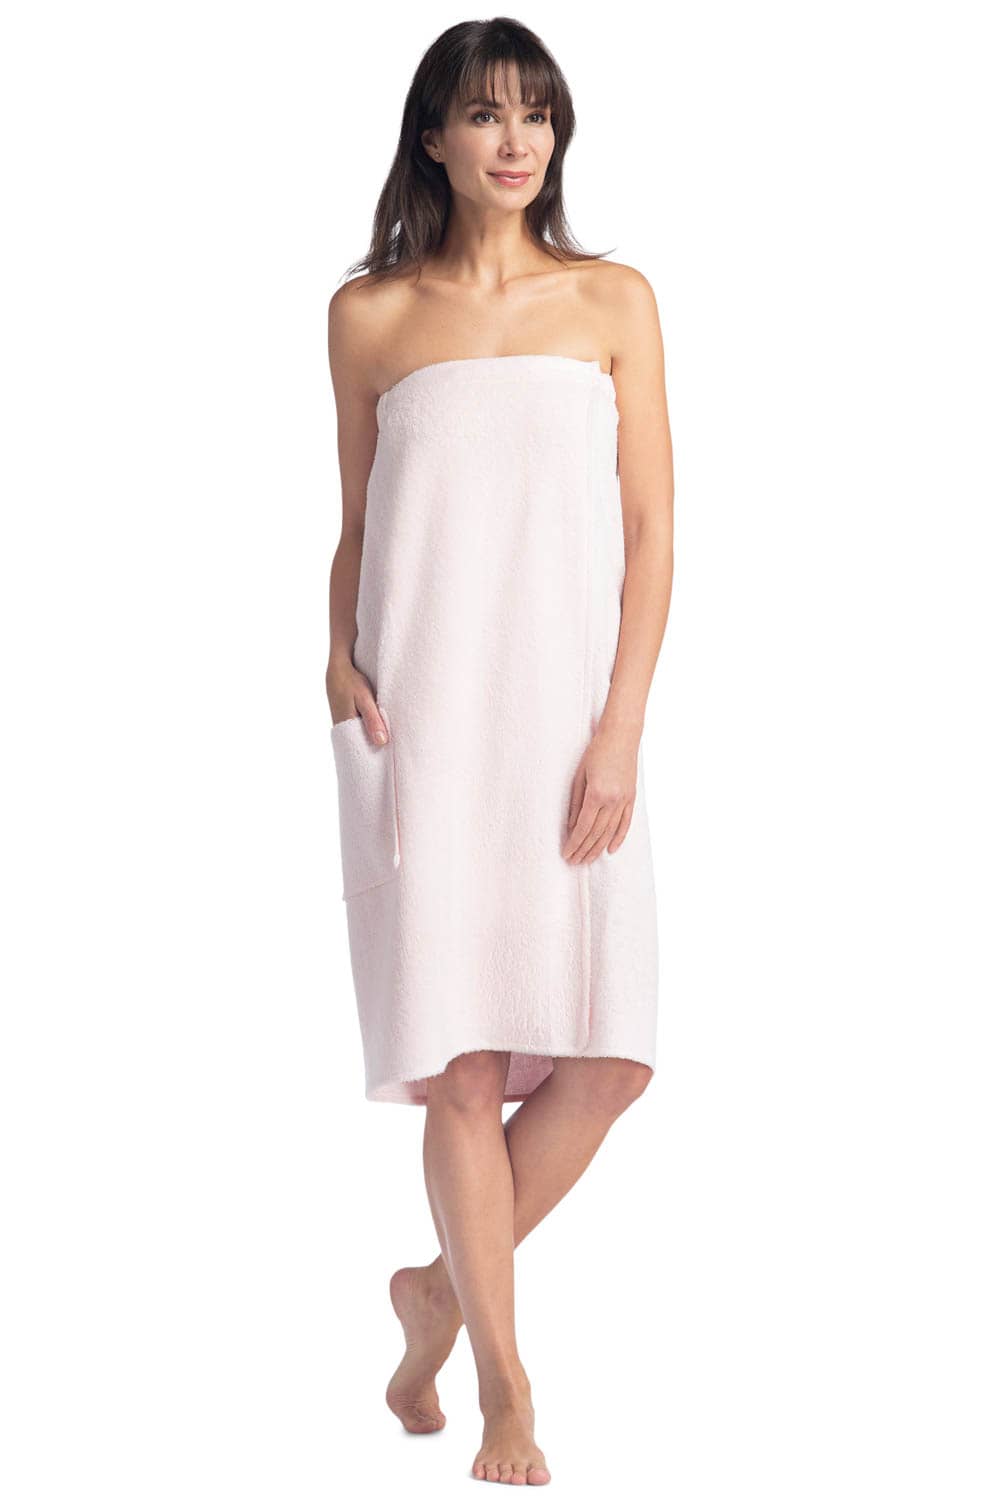 Women's Resort Style Terry Cloth Spa Wrap Womens>Spa>Wrap Fishers Finery Heavenly Pink One-Size 